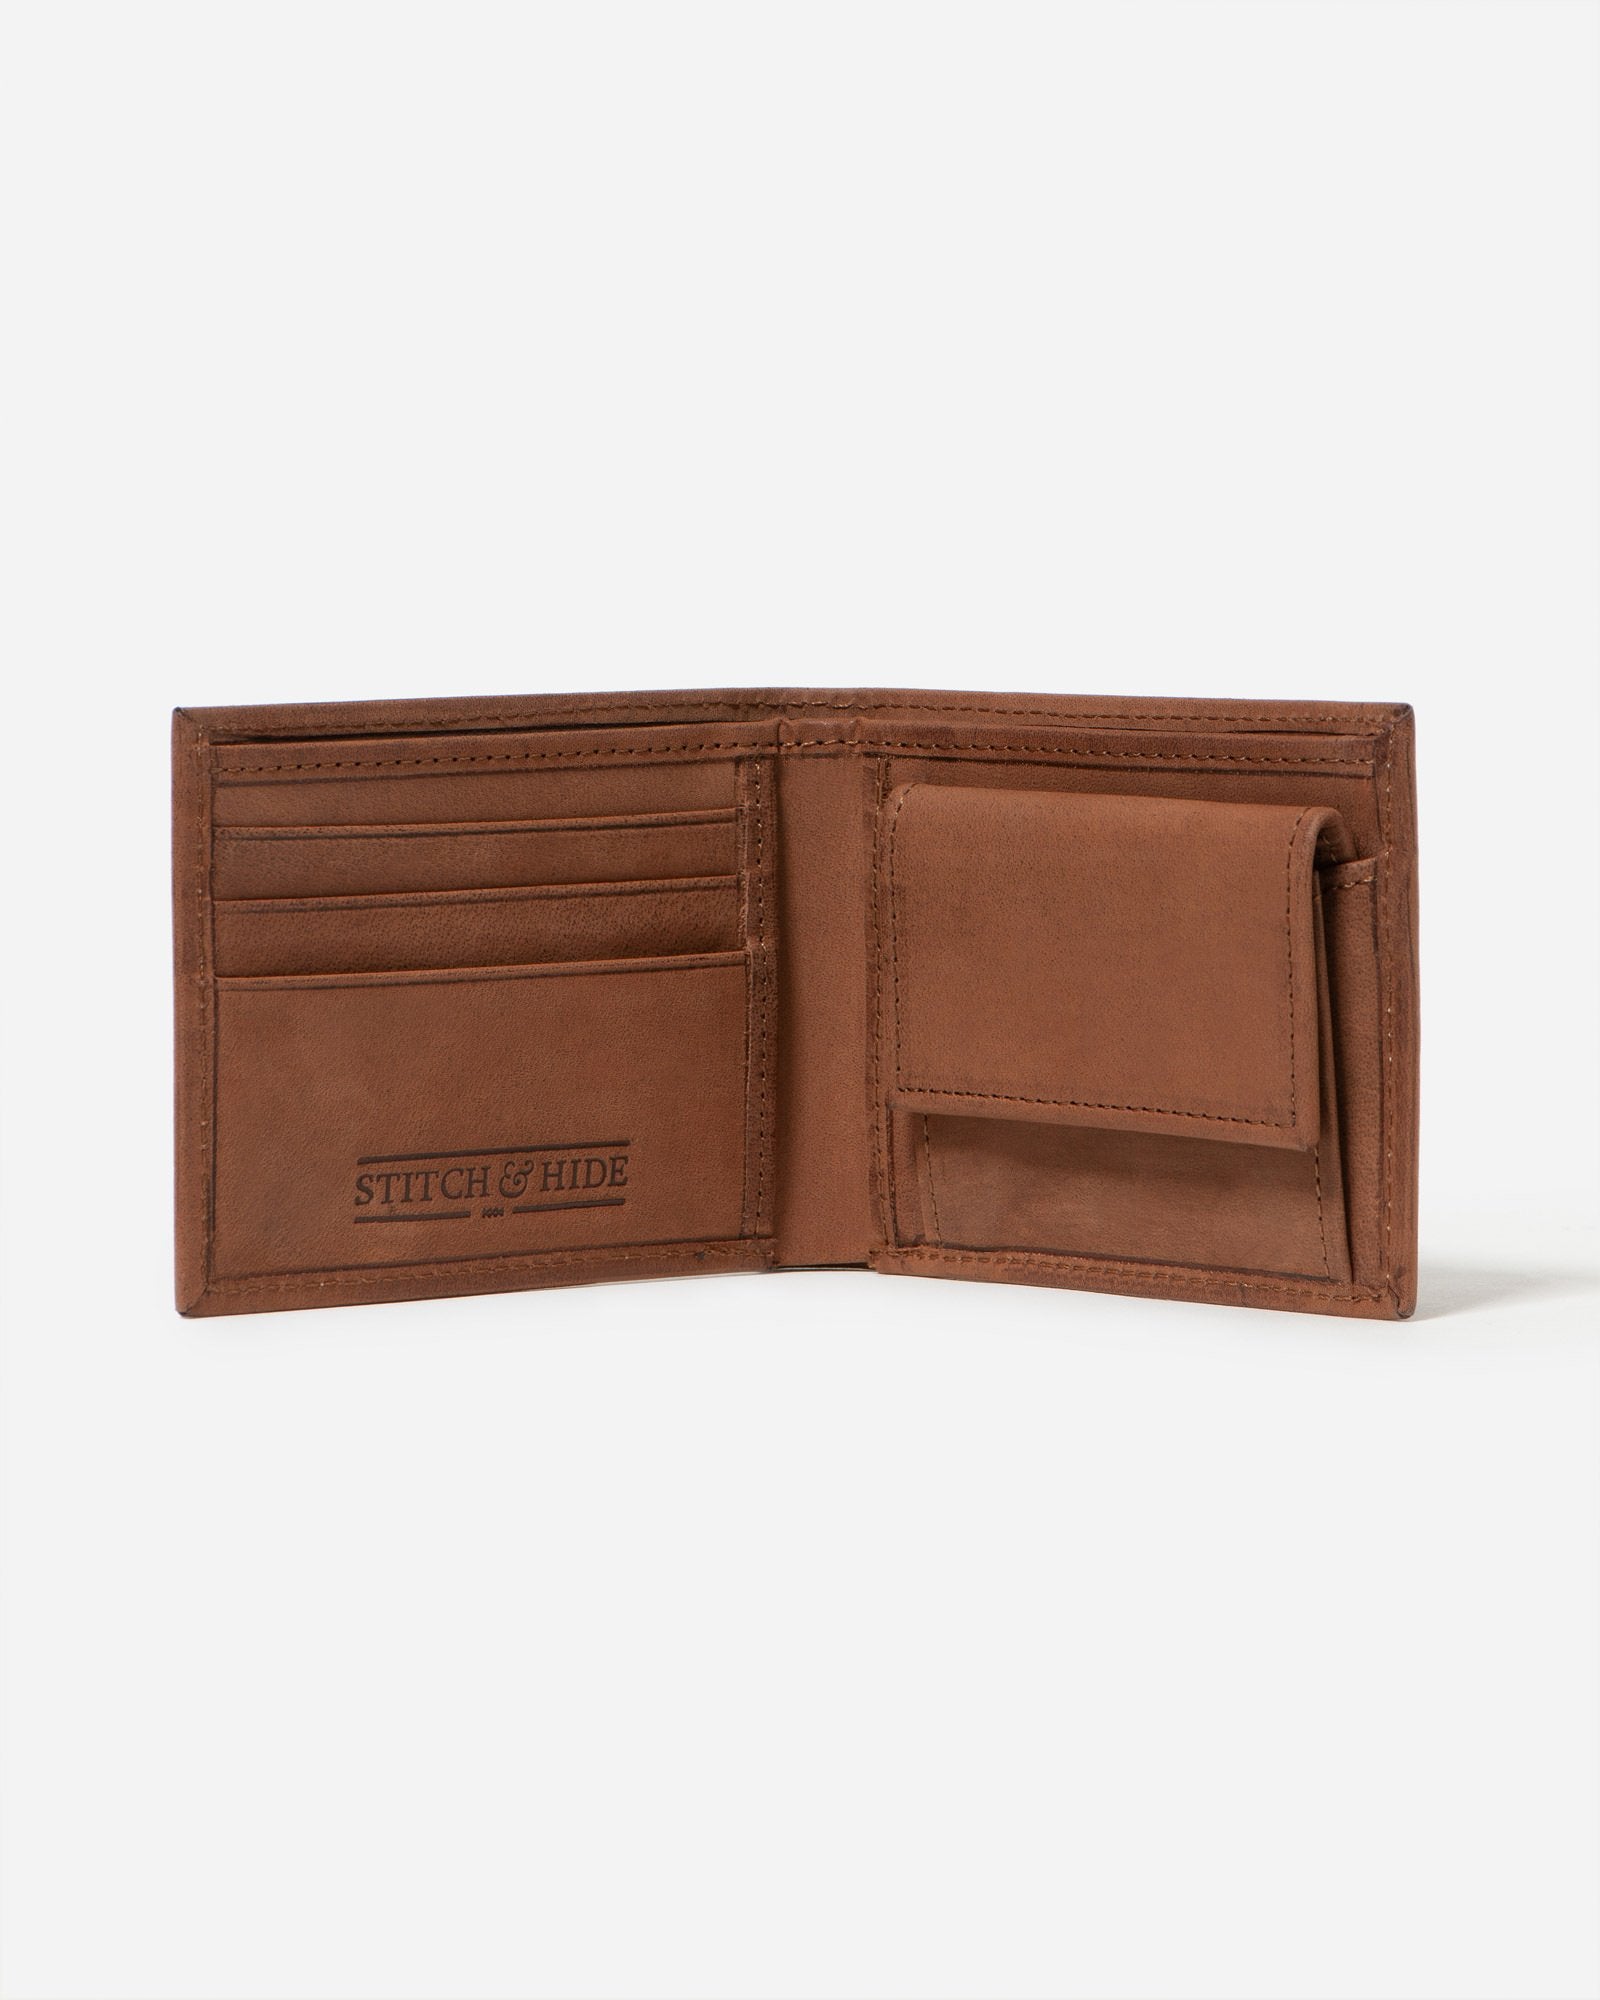 George Wallet - Stitch & Hide Handbags, Wallets & Cases Stitch and Hide Brown 